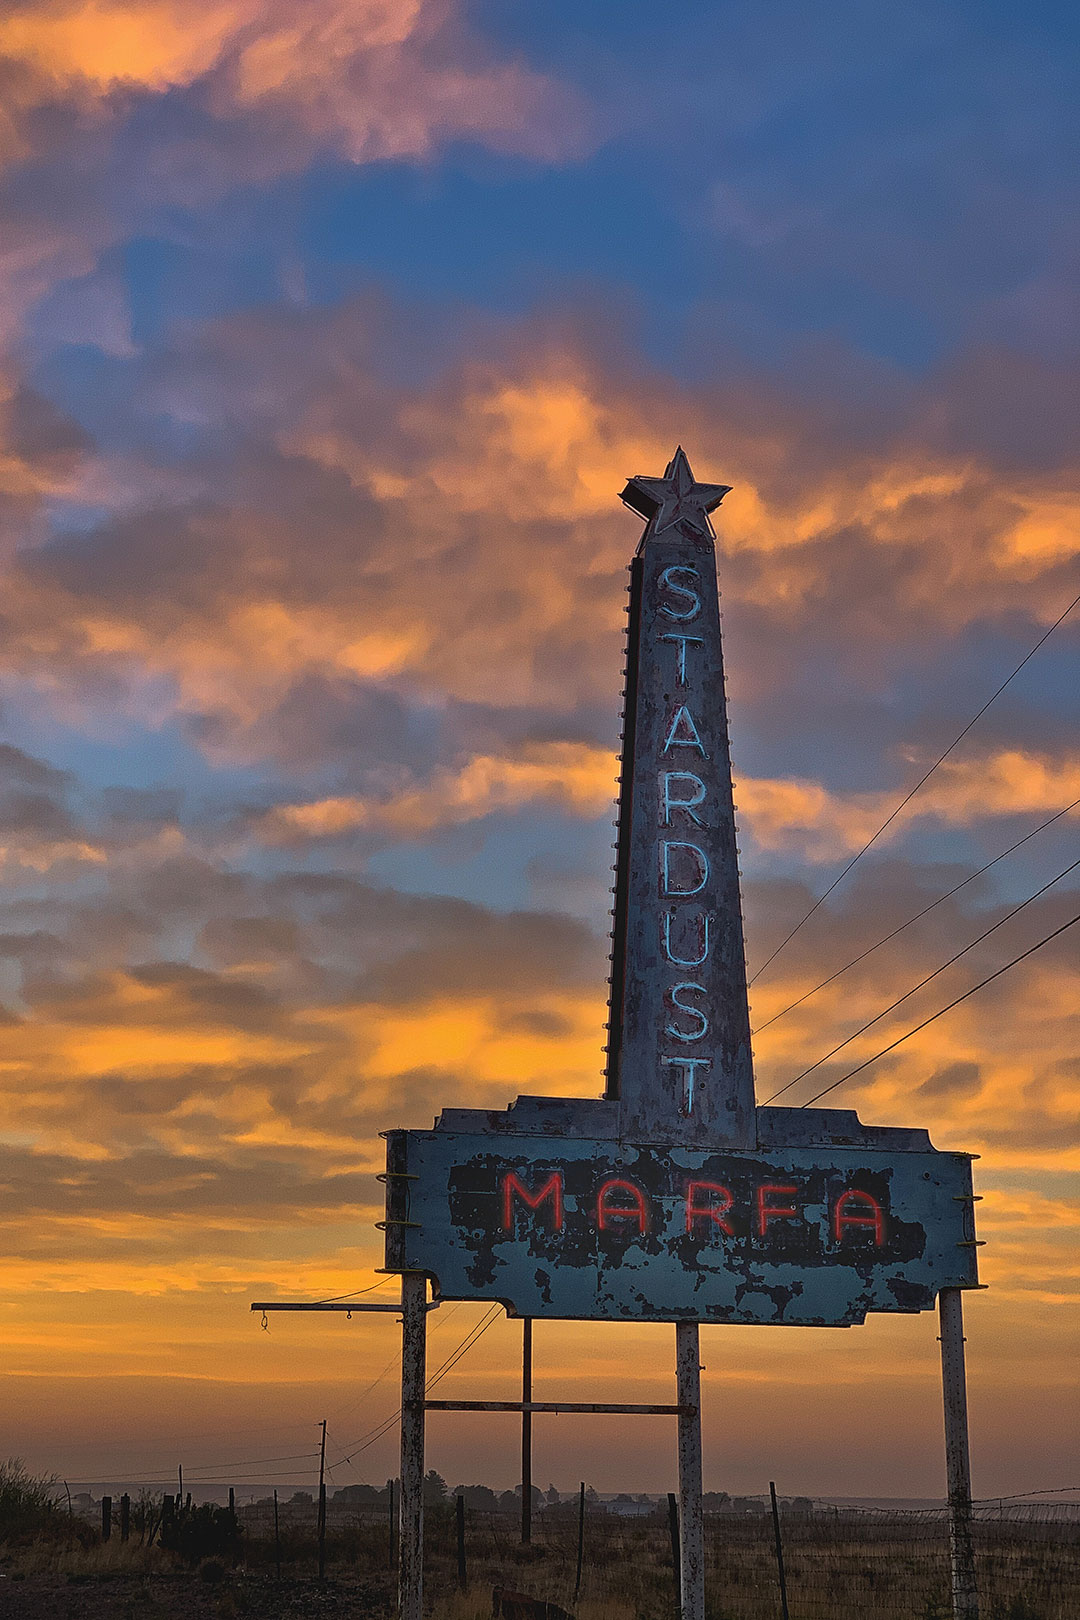 Stardust Motel + What to Do in Marfa Texas